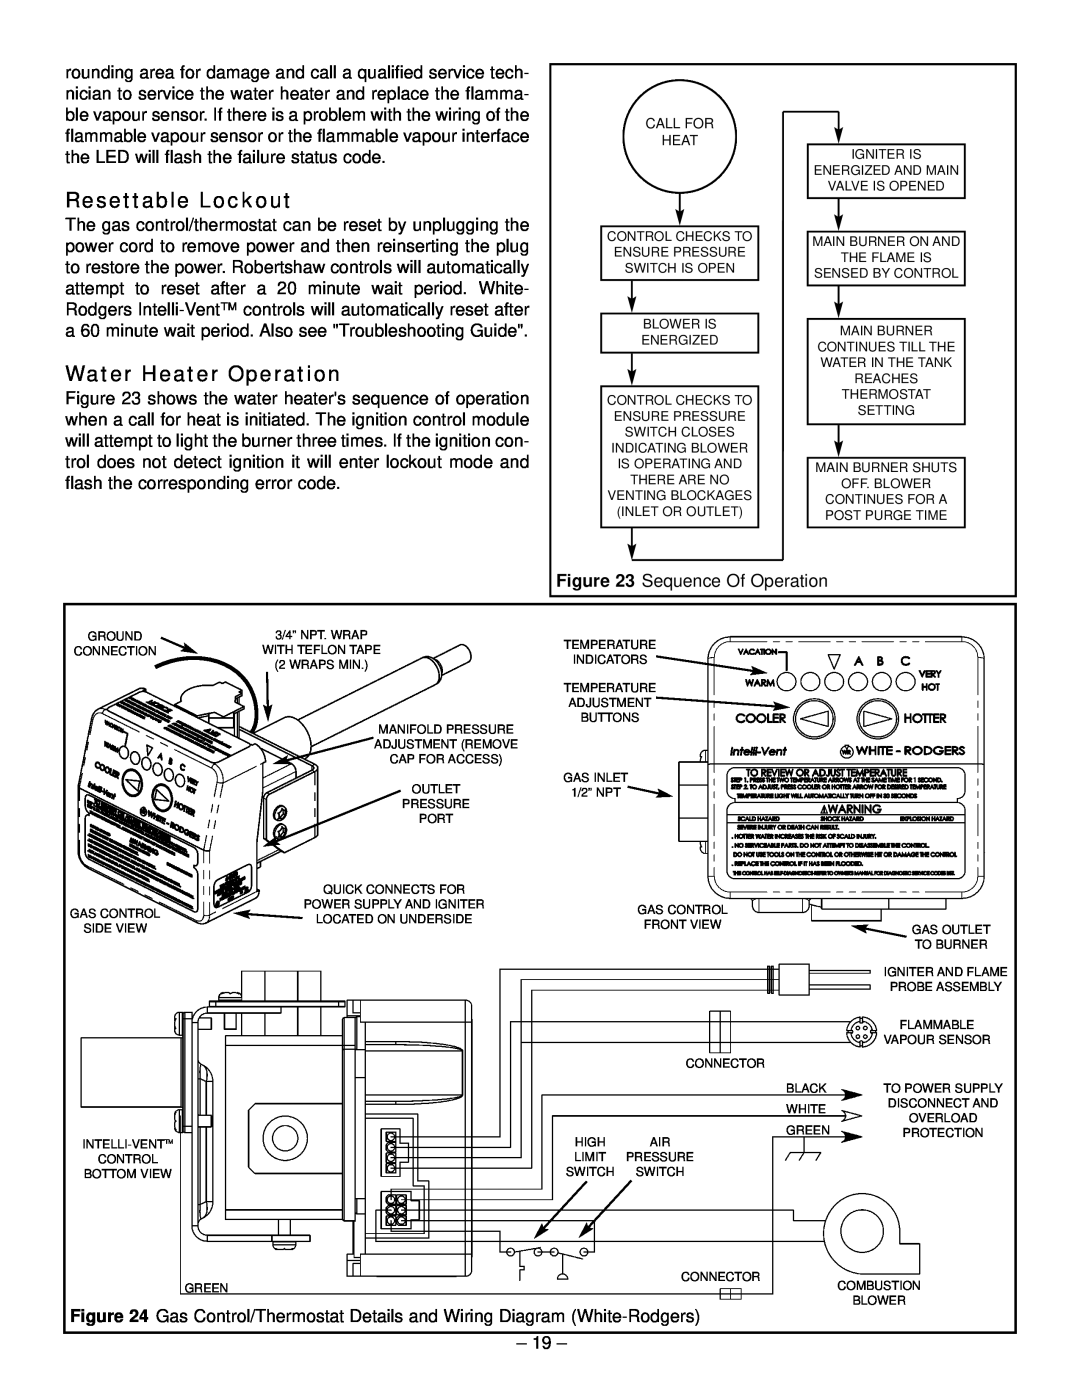 GSW 319594-000 manual Resettable Lockout, Water Heater Operation 